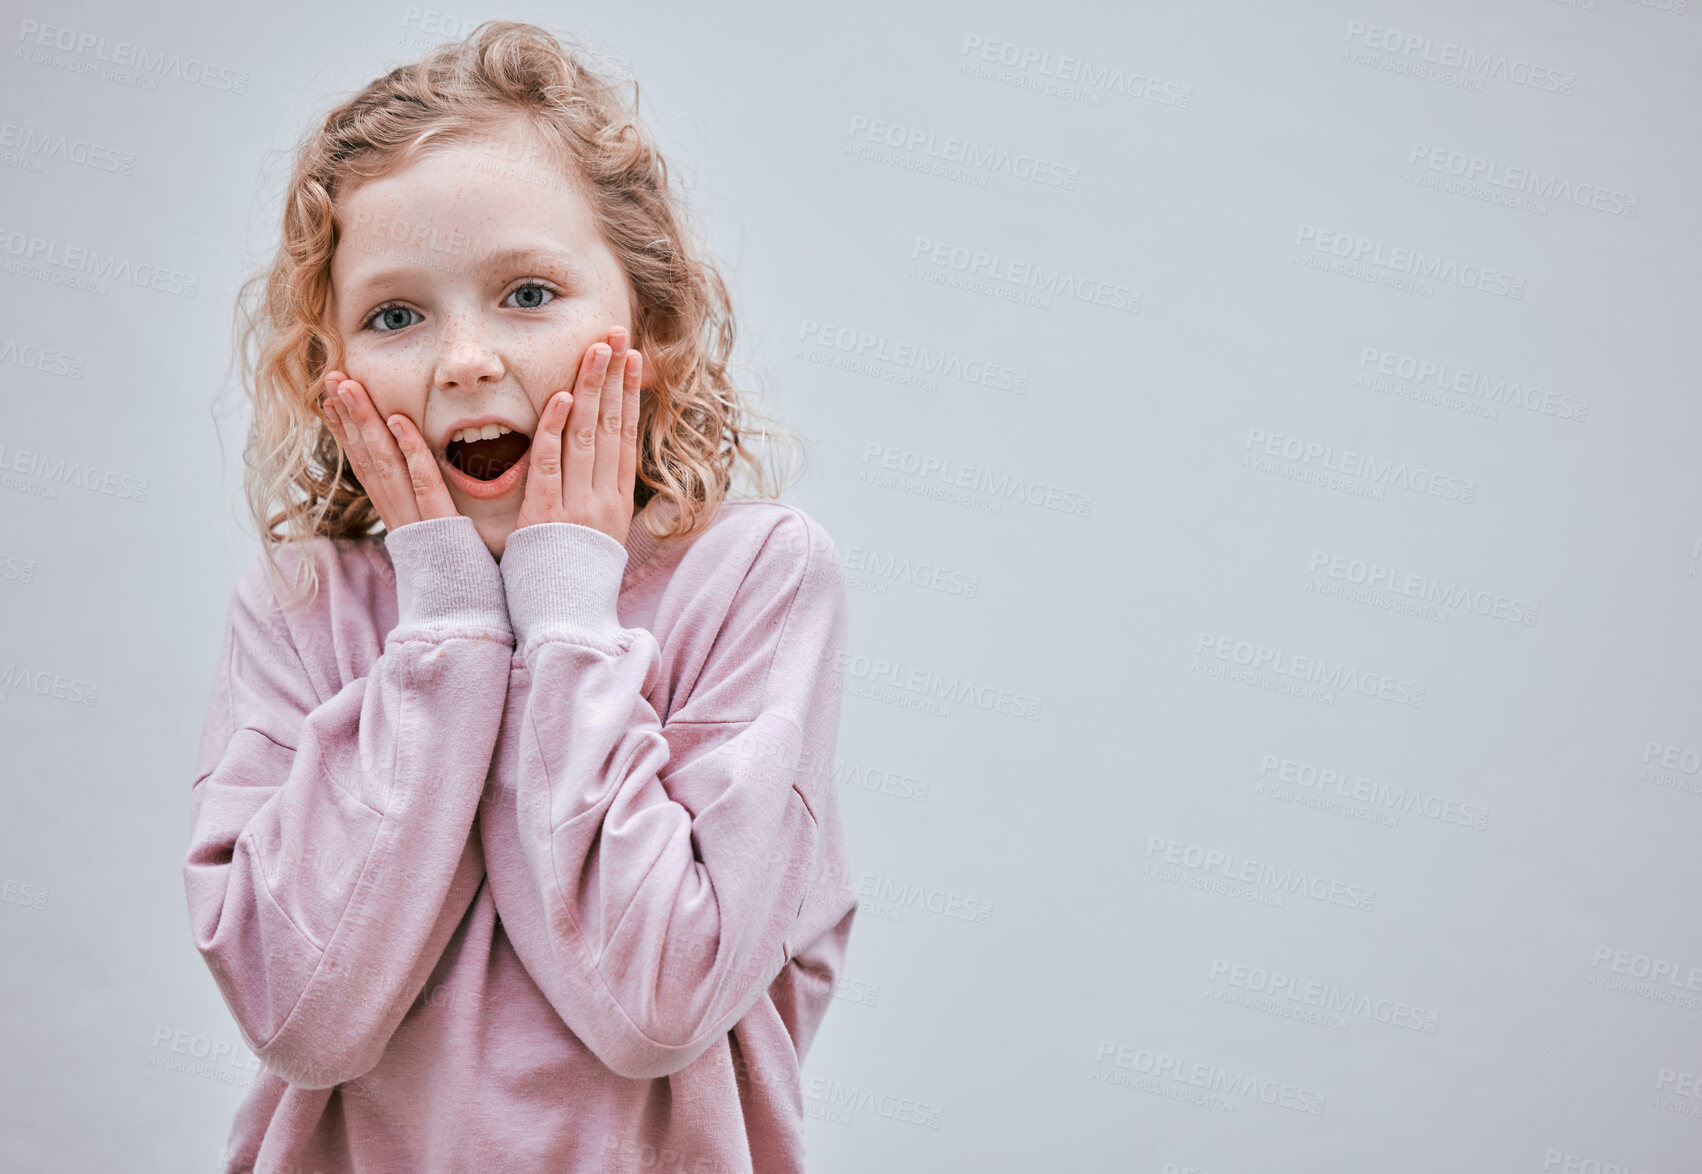 Buy stock photo Studio shot of a little girl looking surprised against a grey background